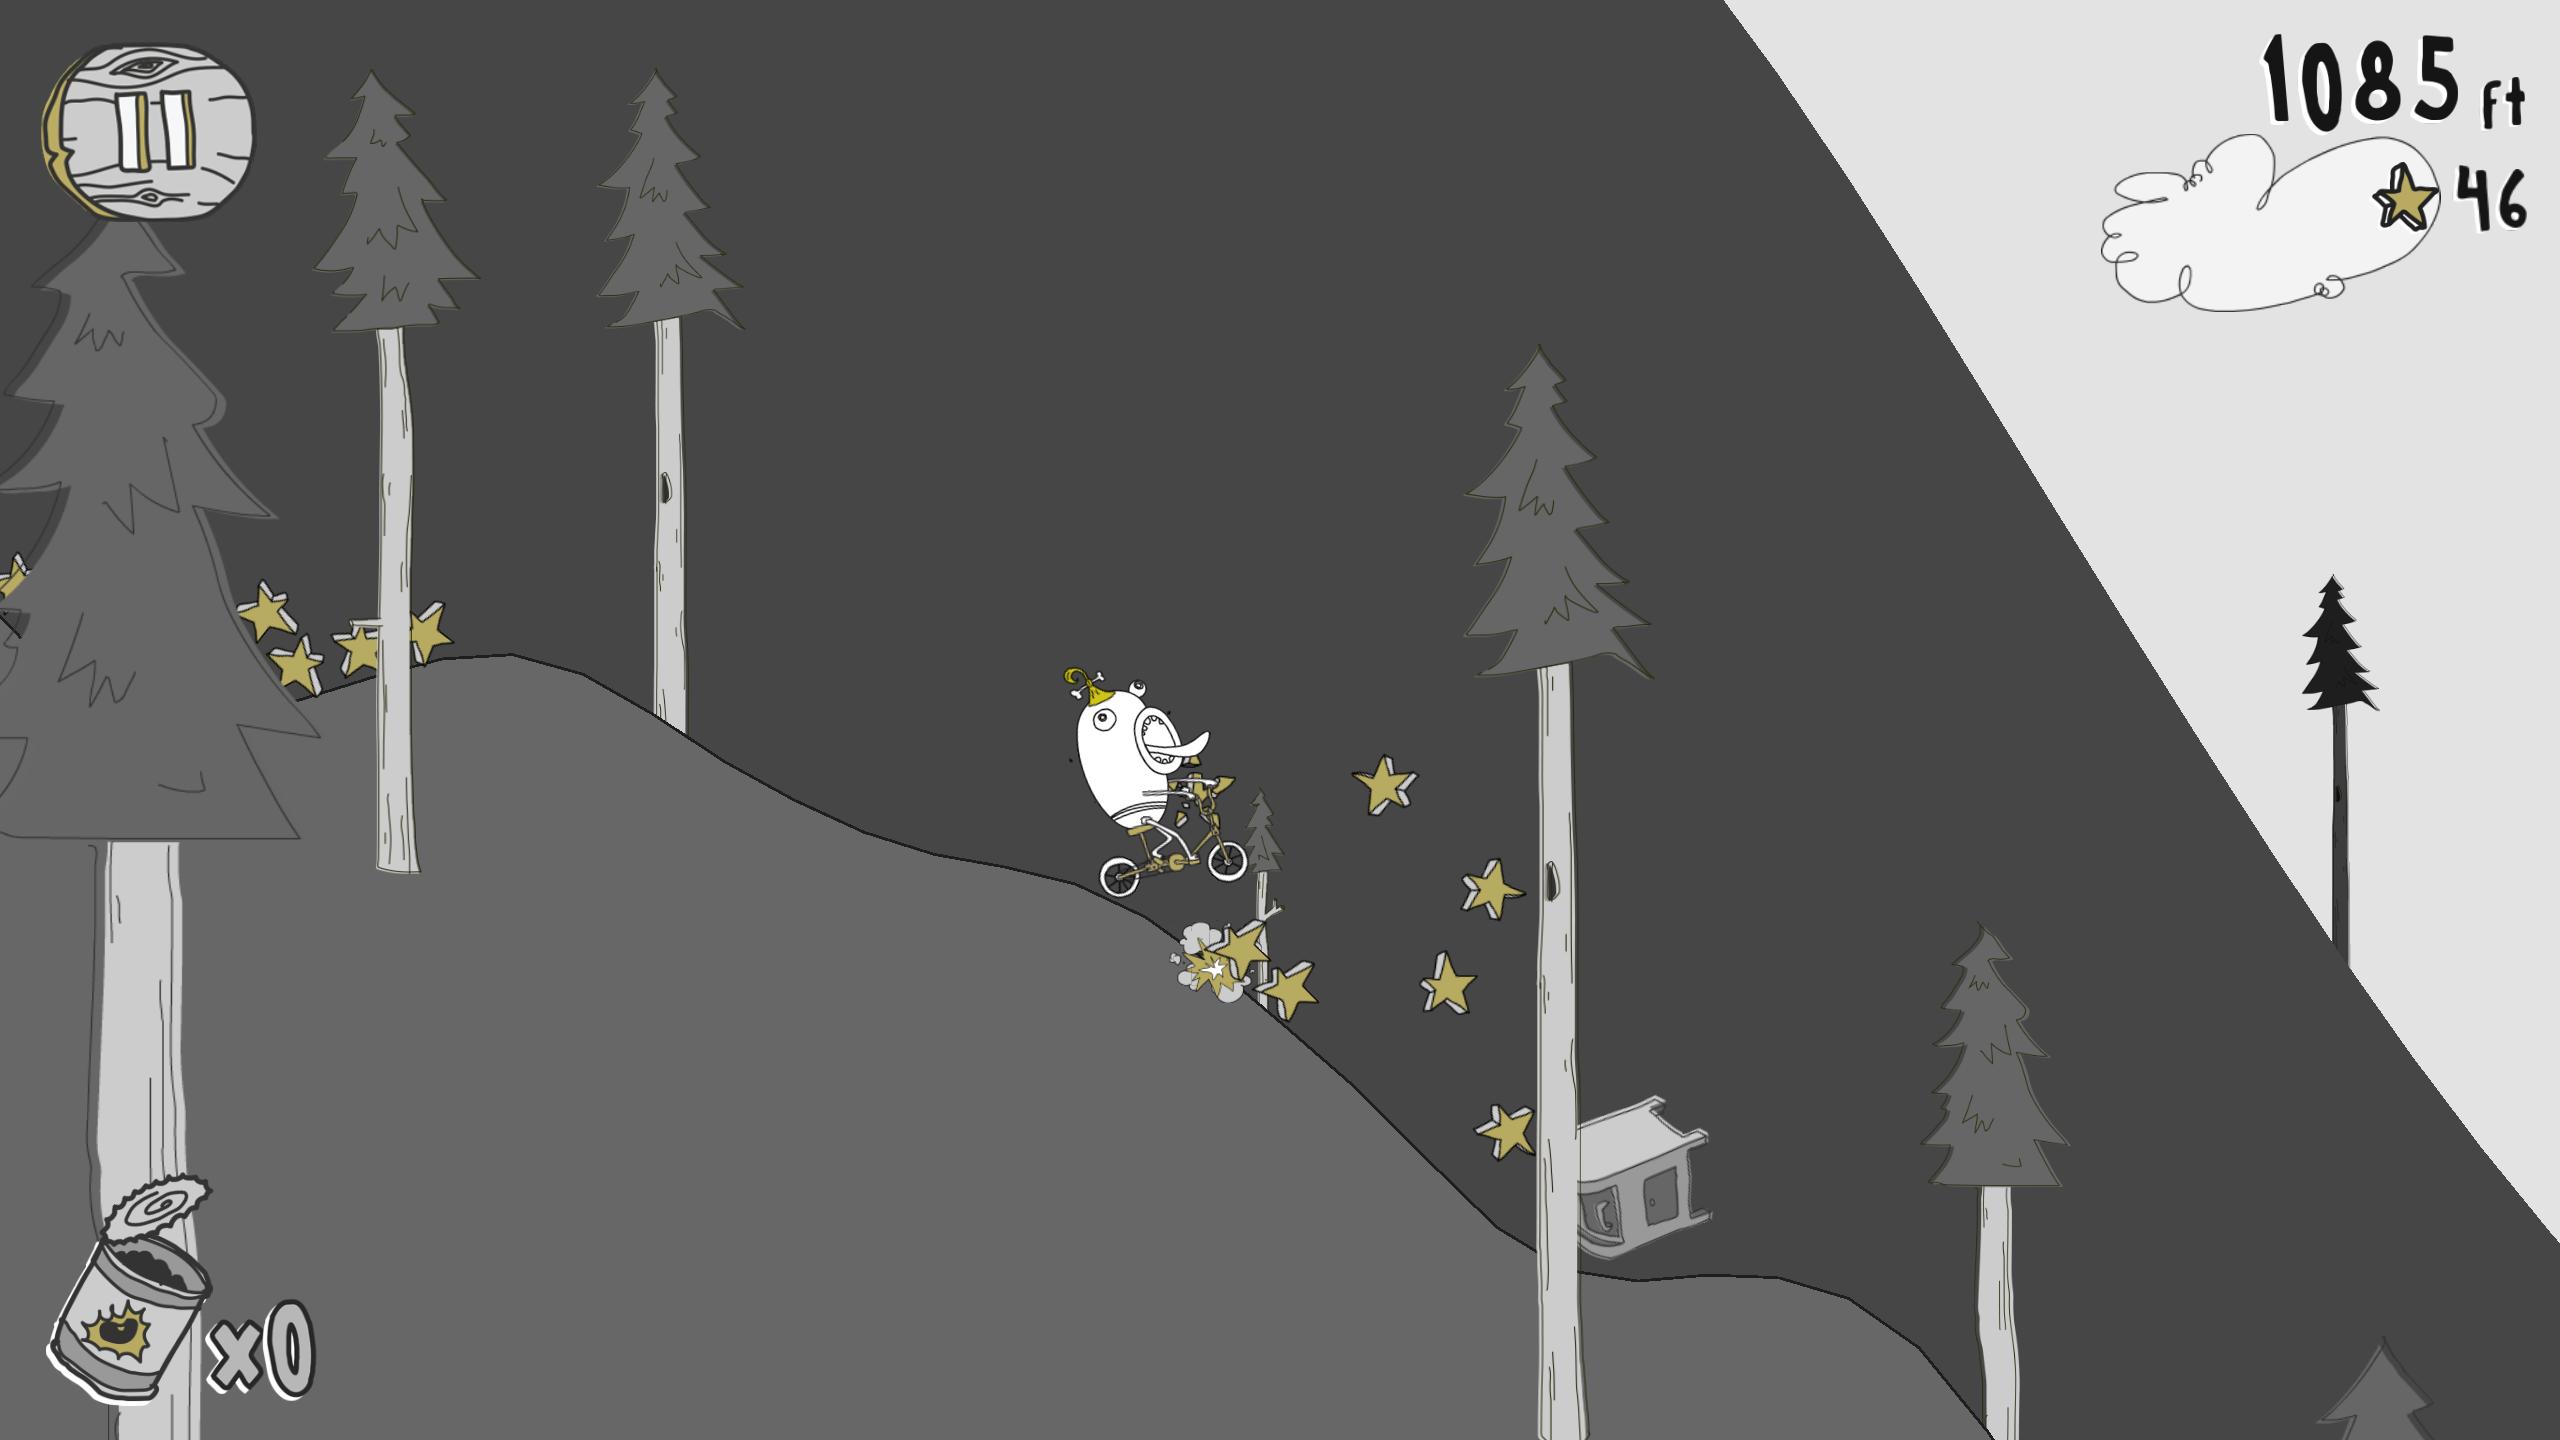 Doofus Drop Silly Rider - Learn to Fart & Fly 1.0.23 Screenshot 21